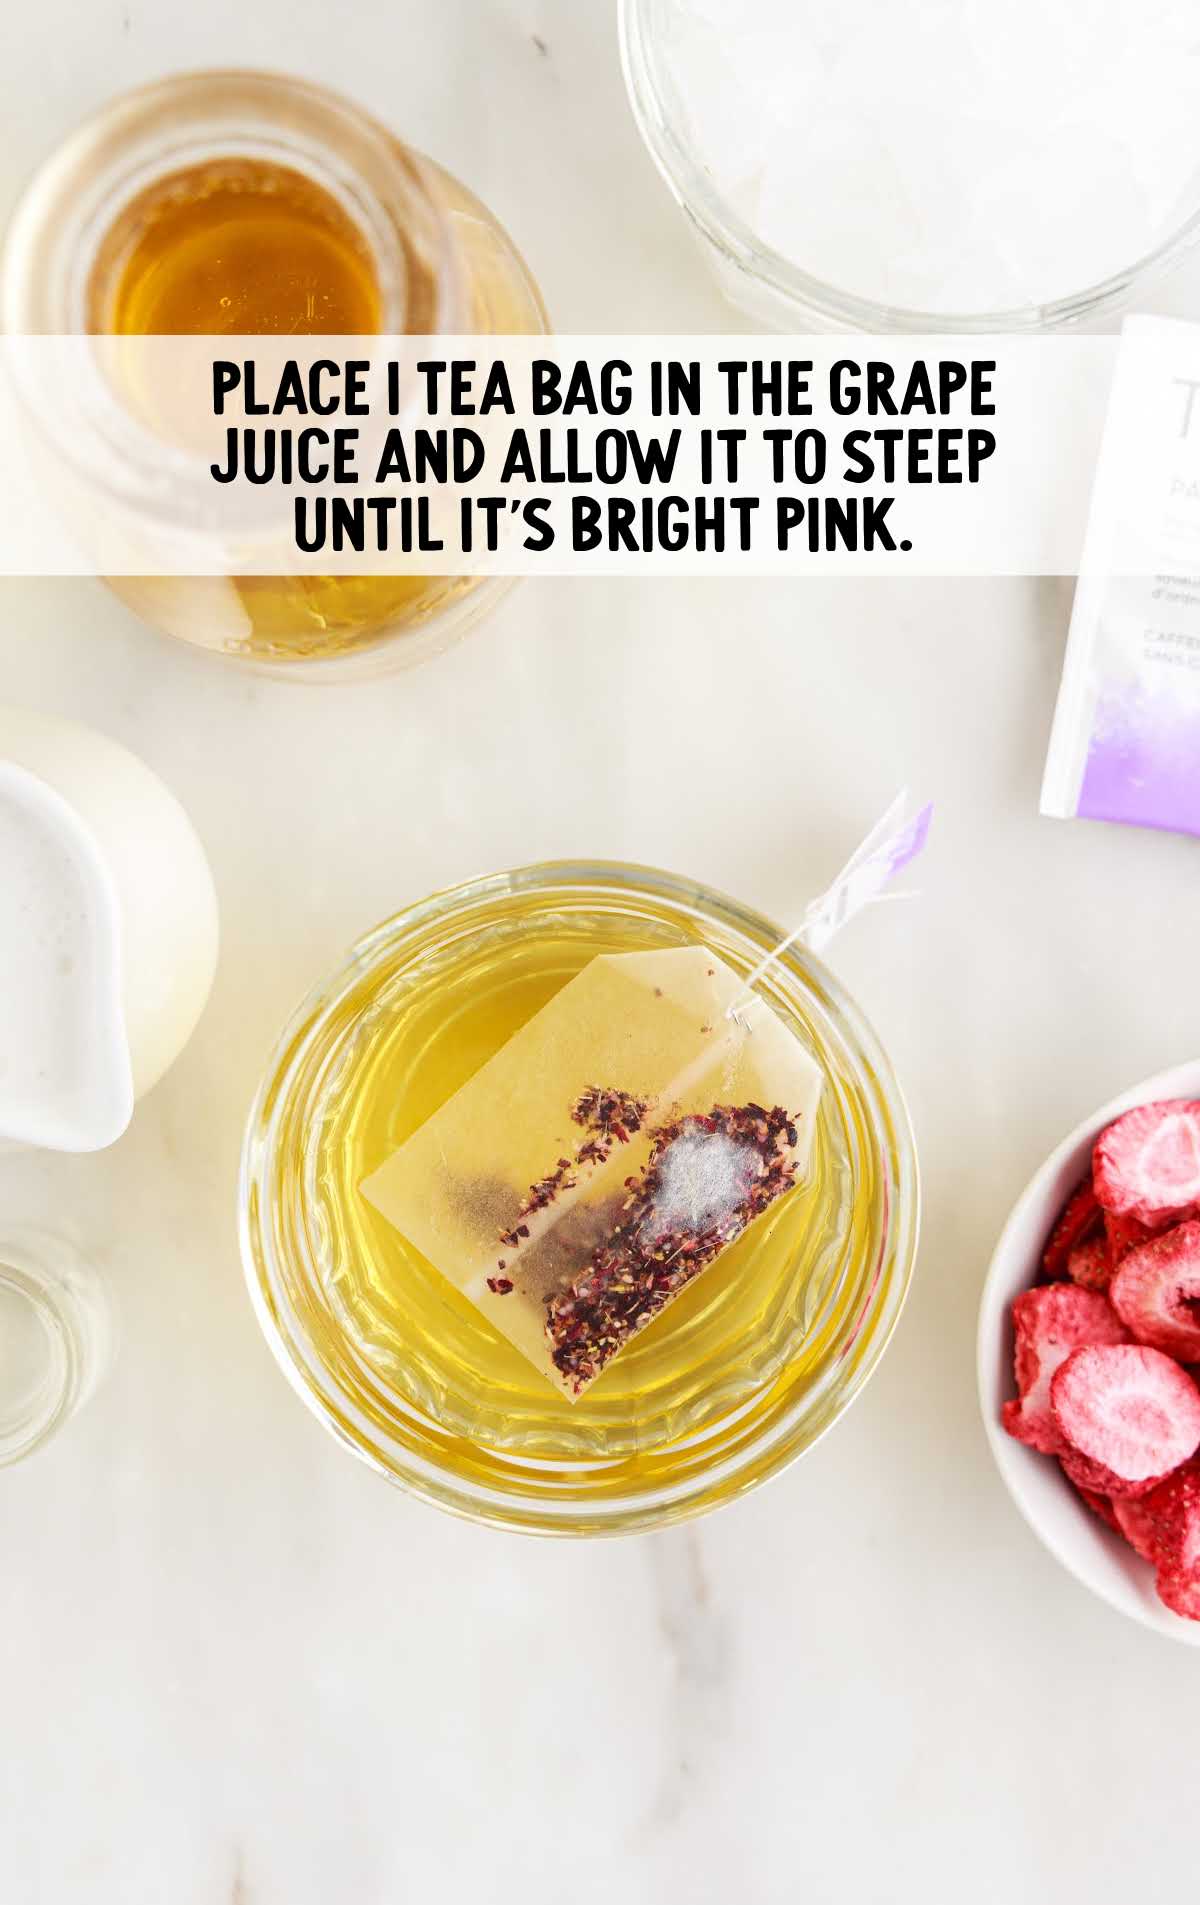 tea bag placed in grape juice in a glass